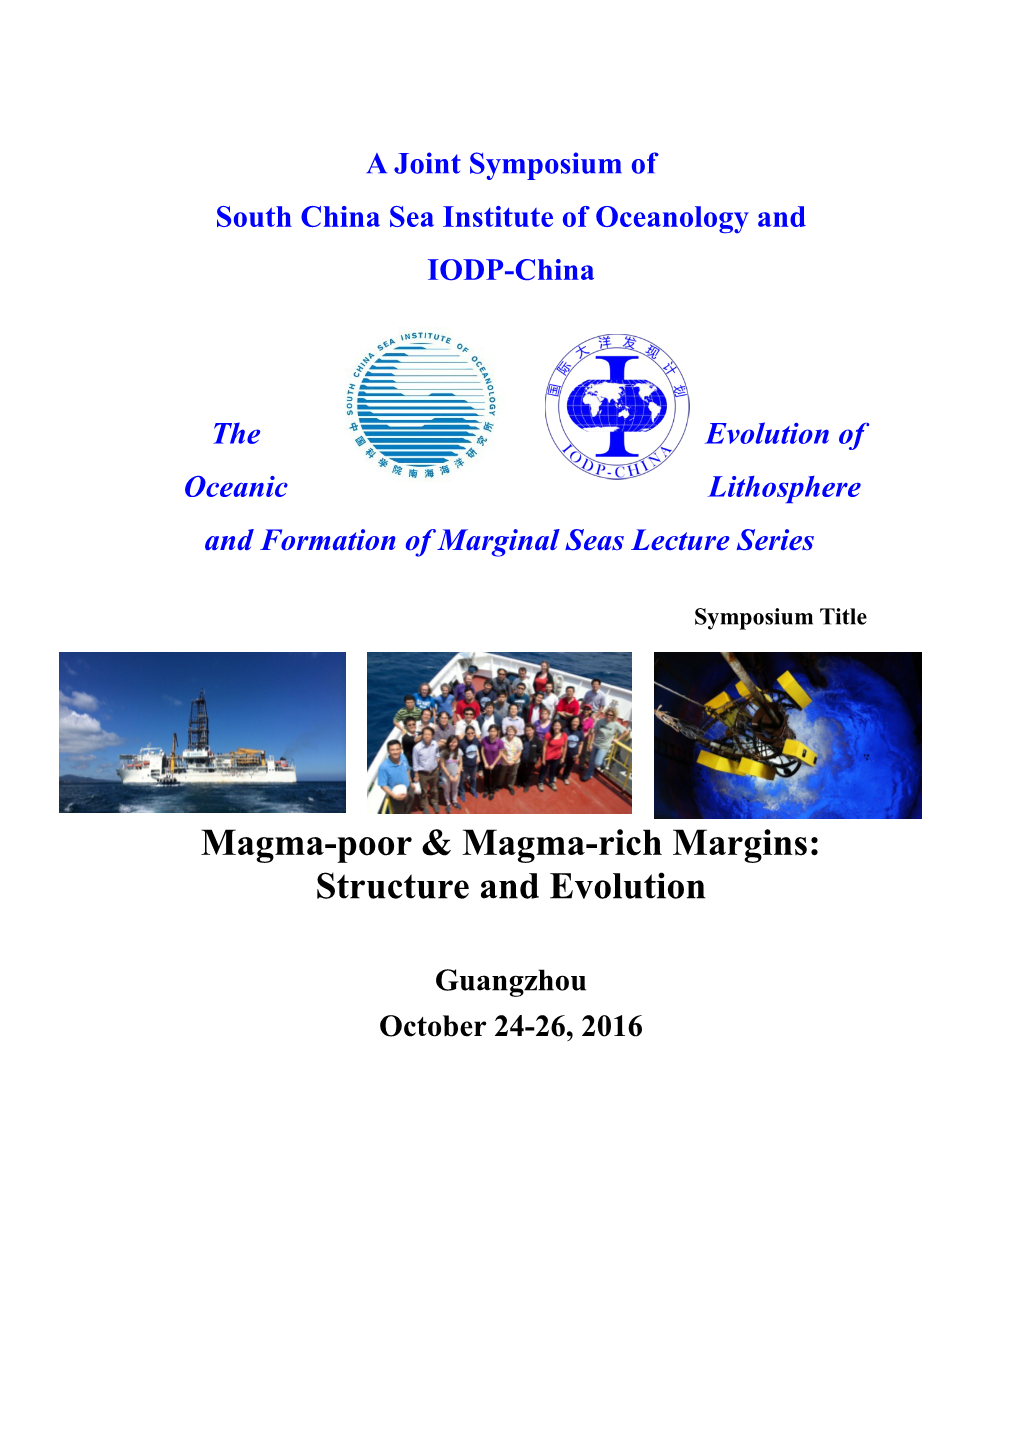 South China Sea Institute of Oceanology And